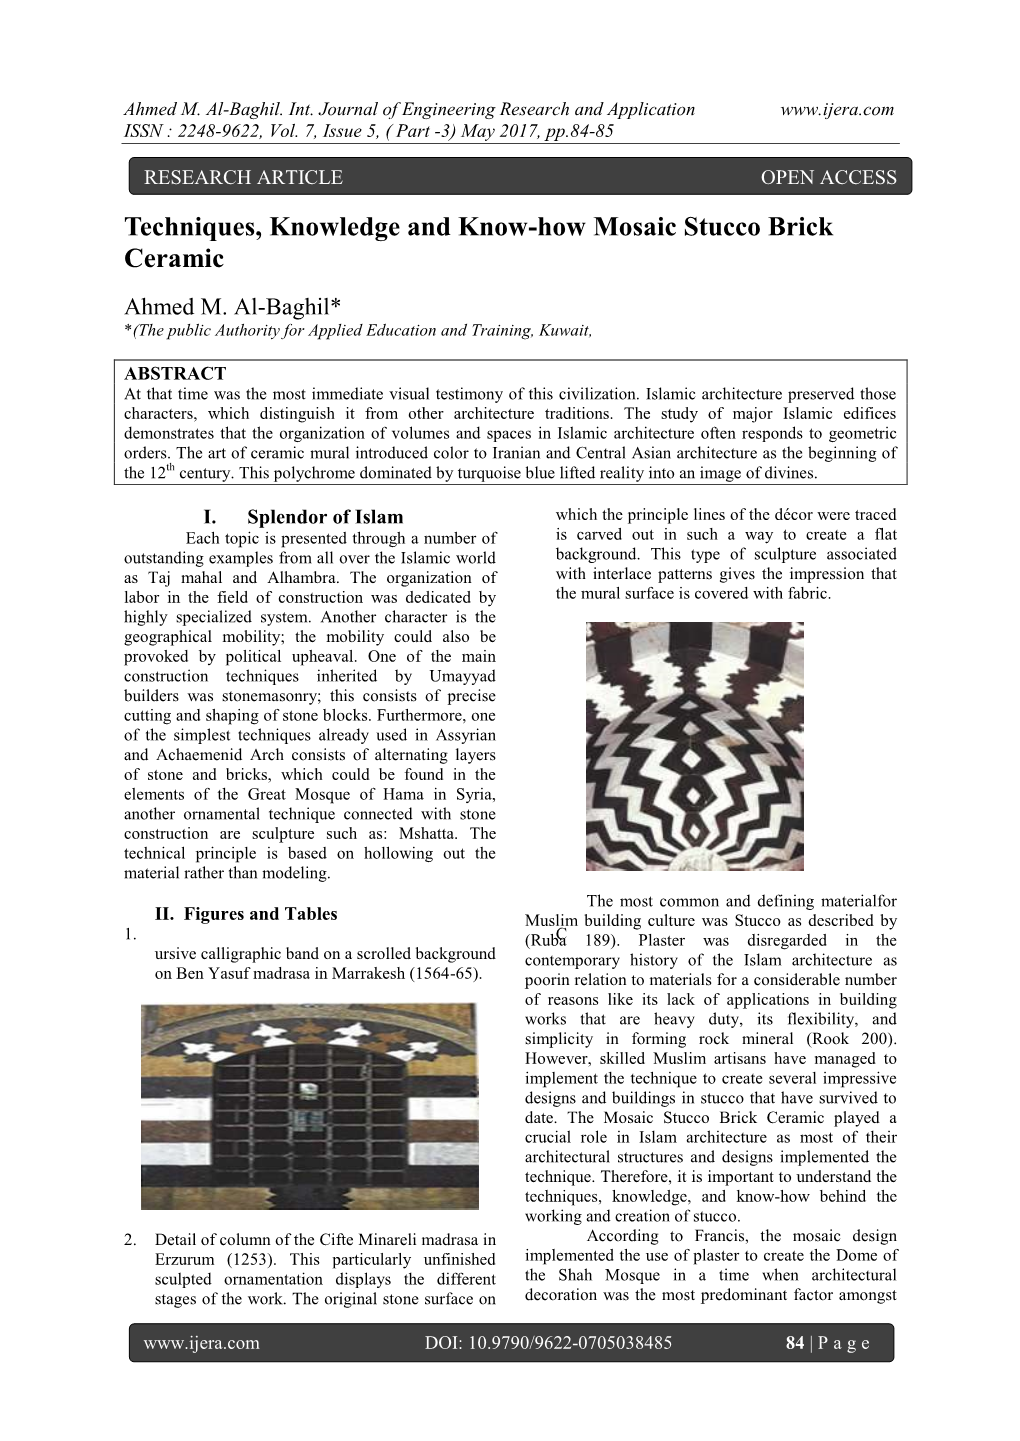 Techniques, Knowledge and Know-How Mosaic Stucco Brick Ceramic